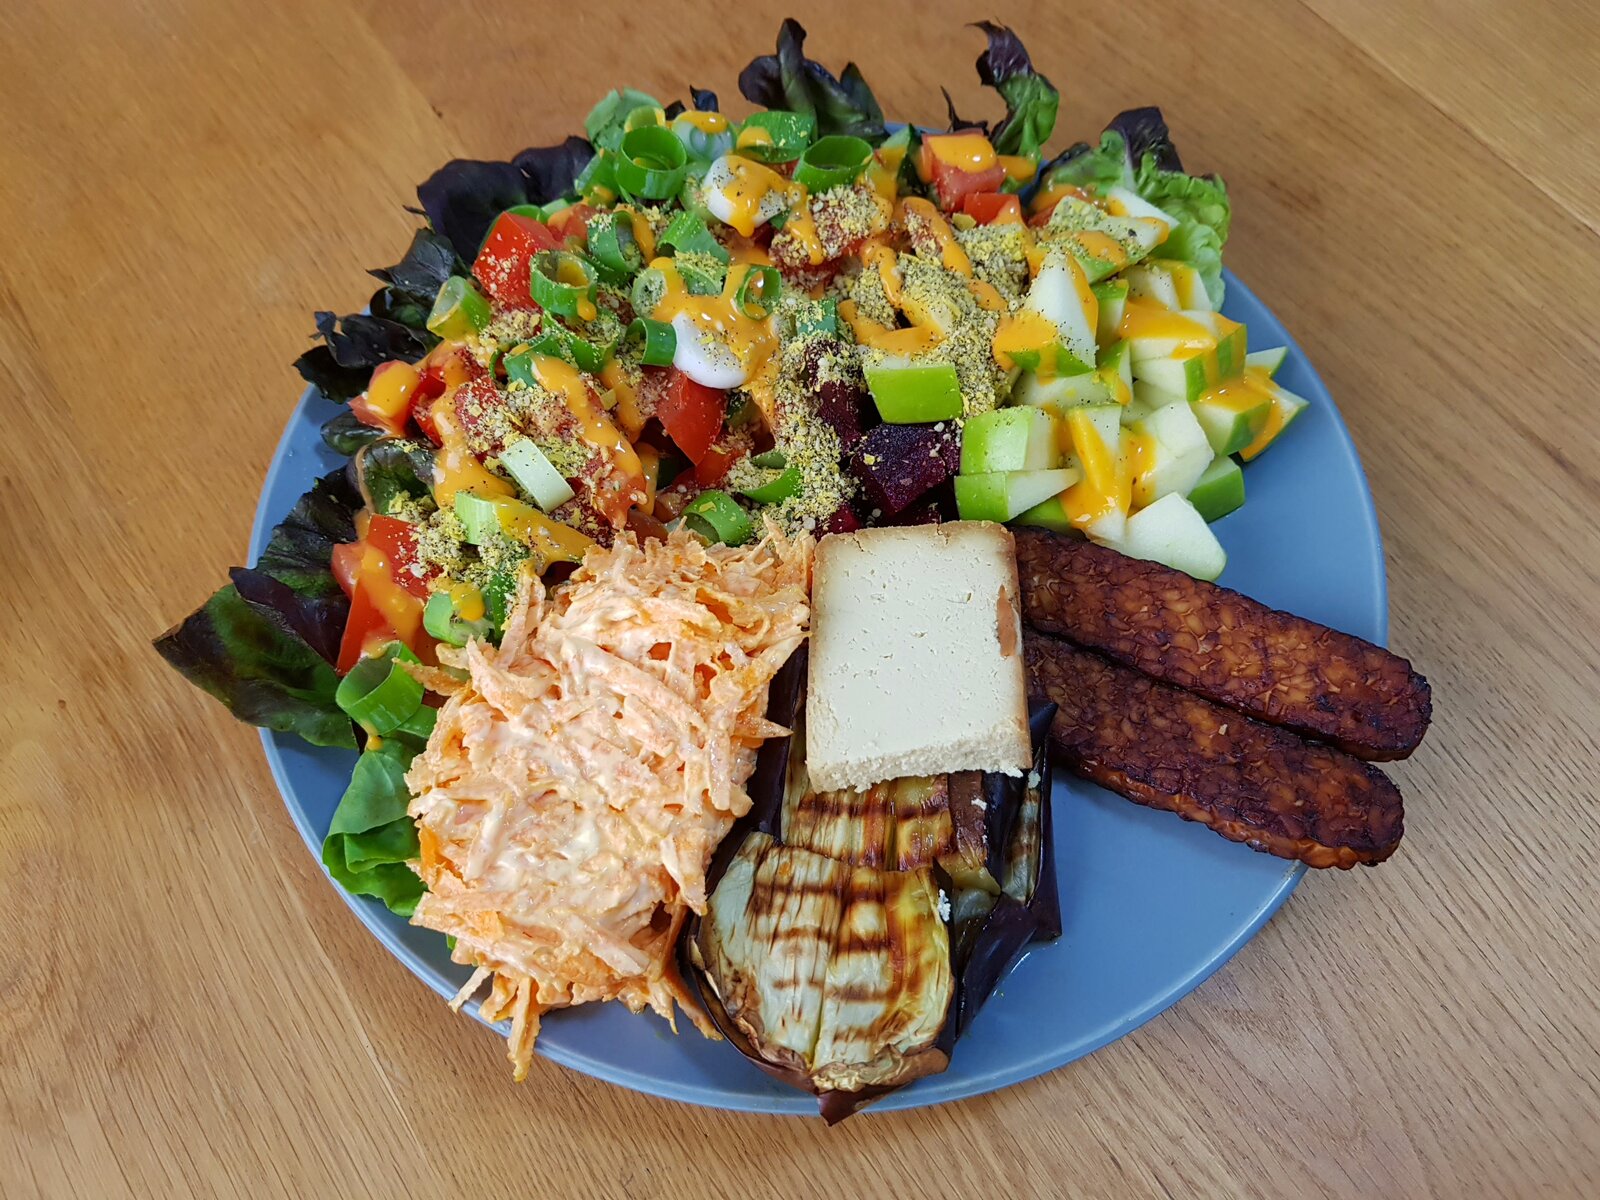 A make do with what's in the fridge salad